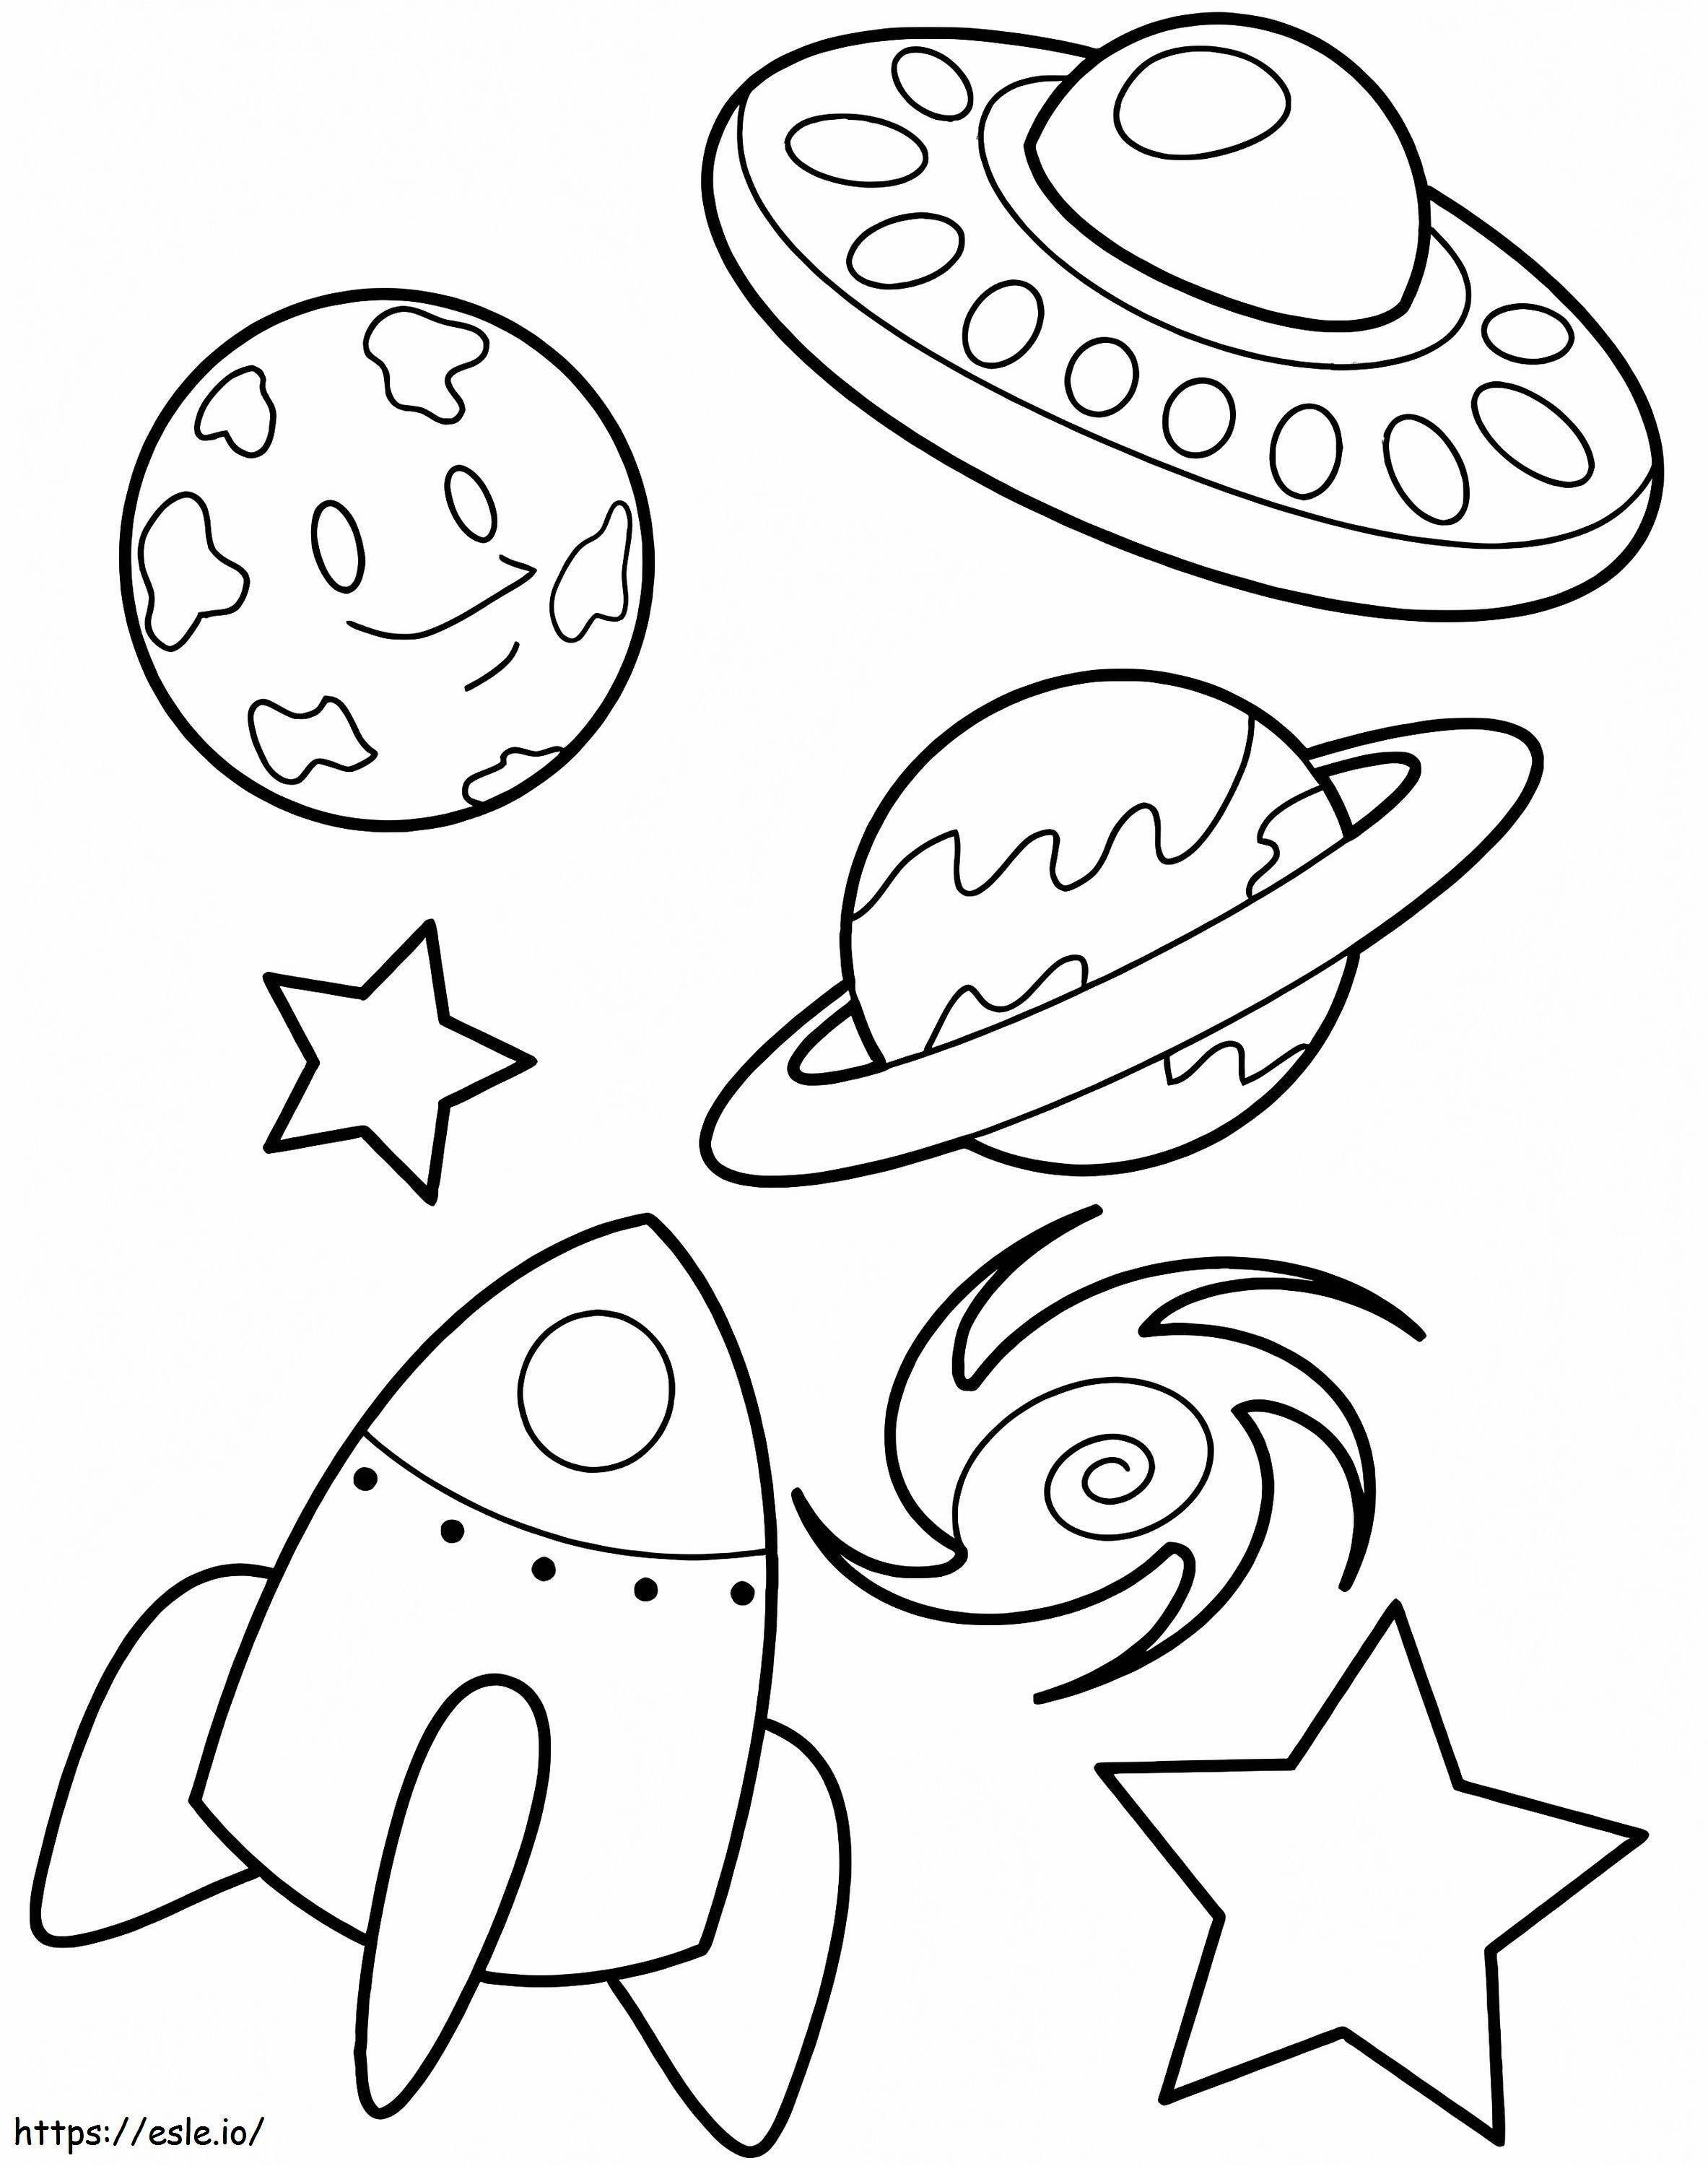 Cute Space coloring page